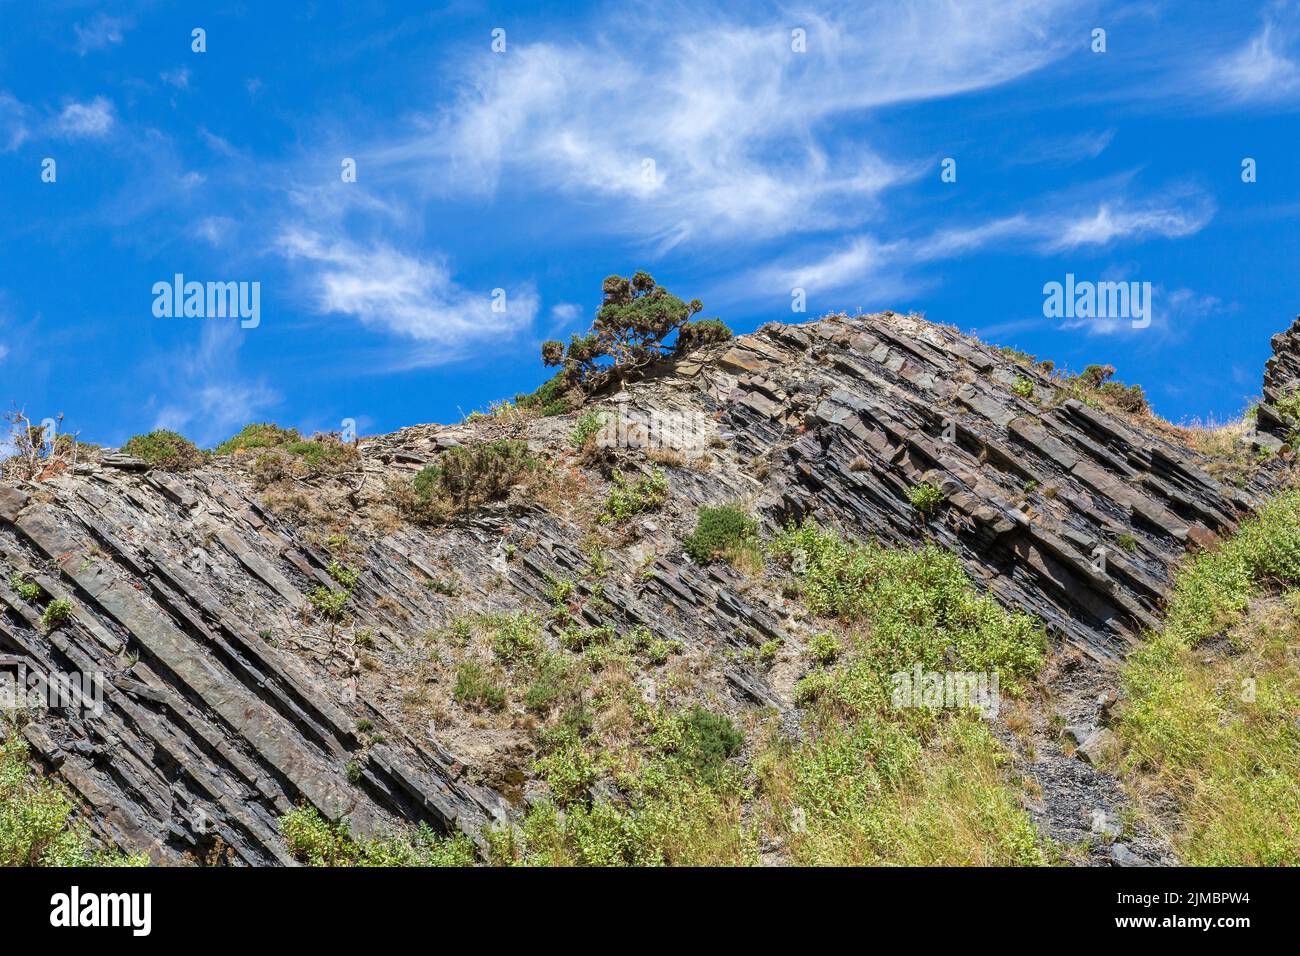 Mountainous landscape featuring jagged rocks and flora set against a blue sky. Health, fitness, walking, hiking or active leisure time concept. Stock Photo